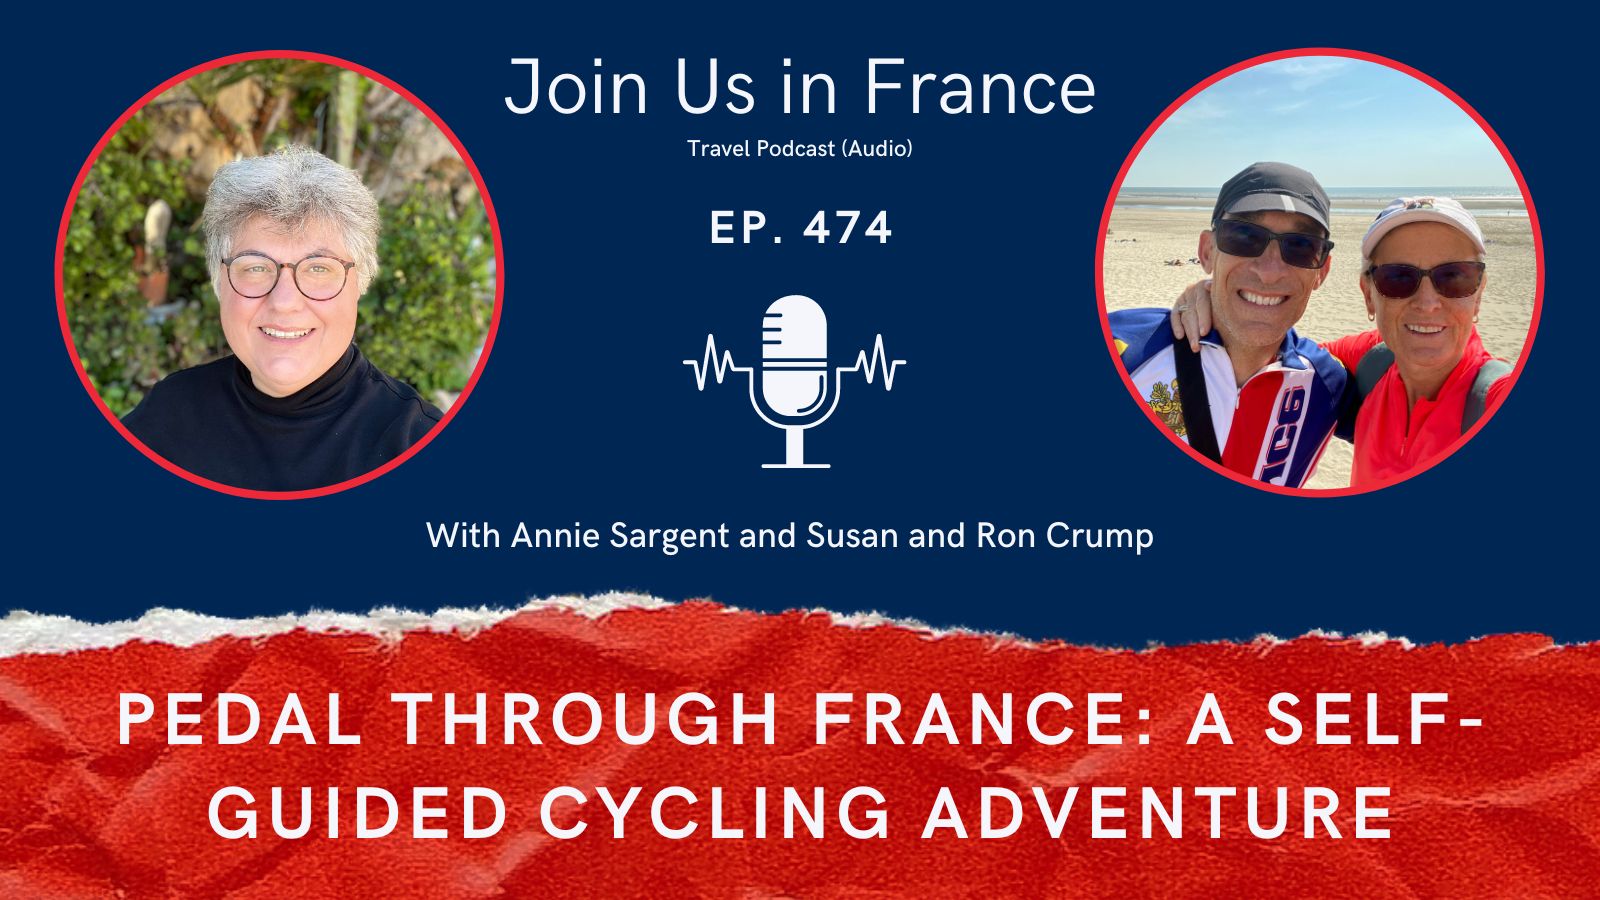 Self-Guided Cycling Adventure in France episode